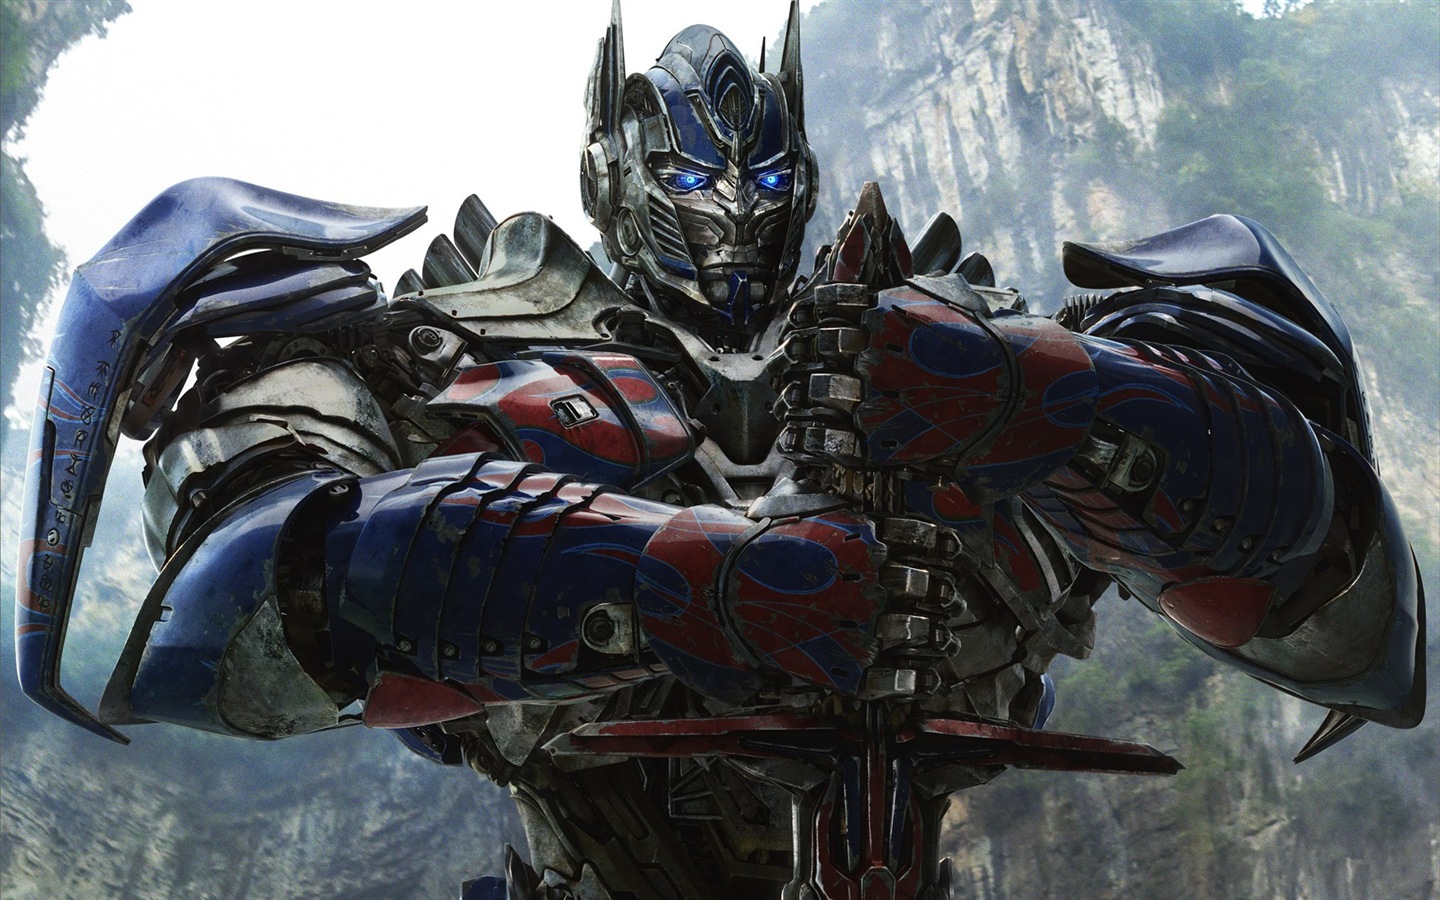 2014 Transformers: Age of Extinction HD tapety #10 - 1440x900